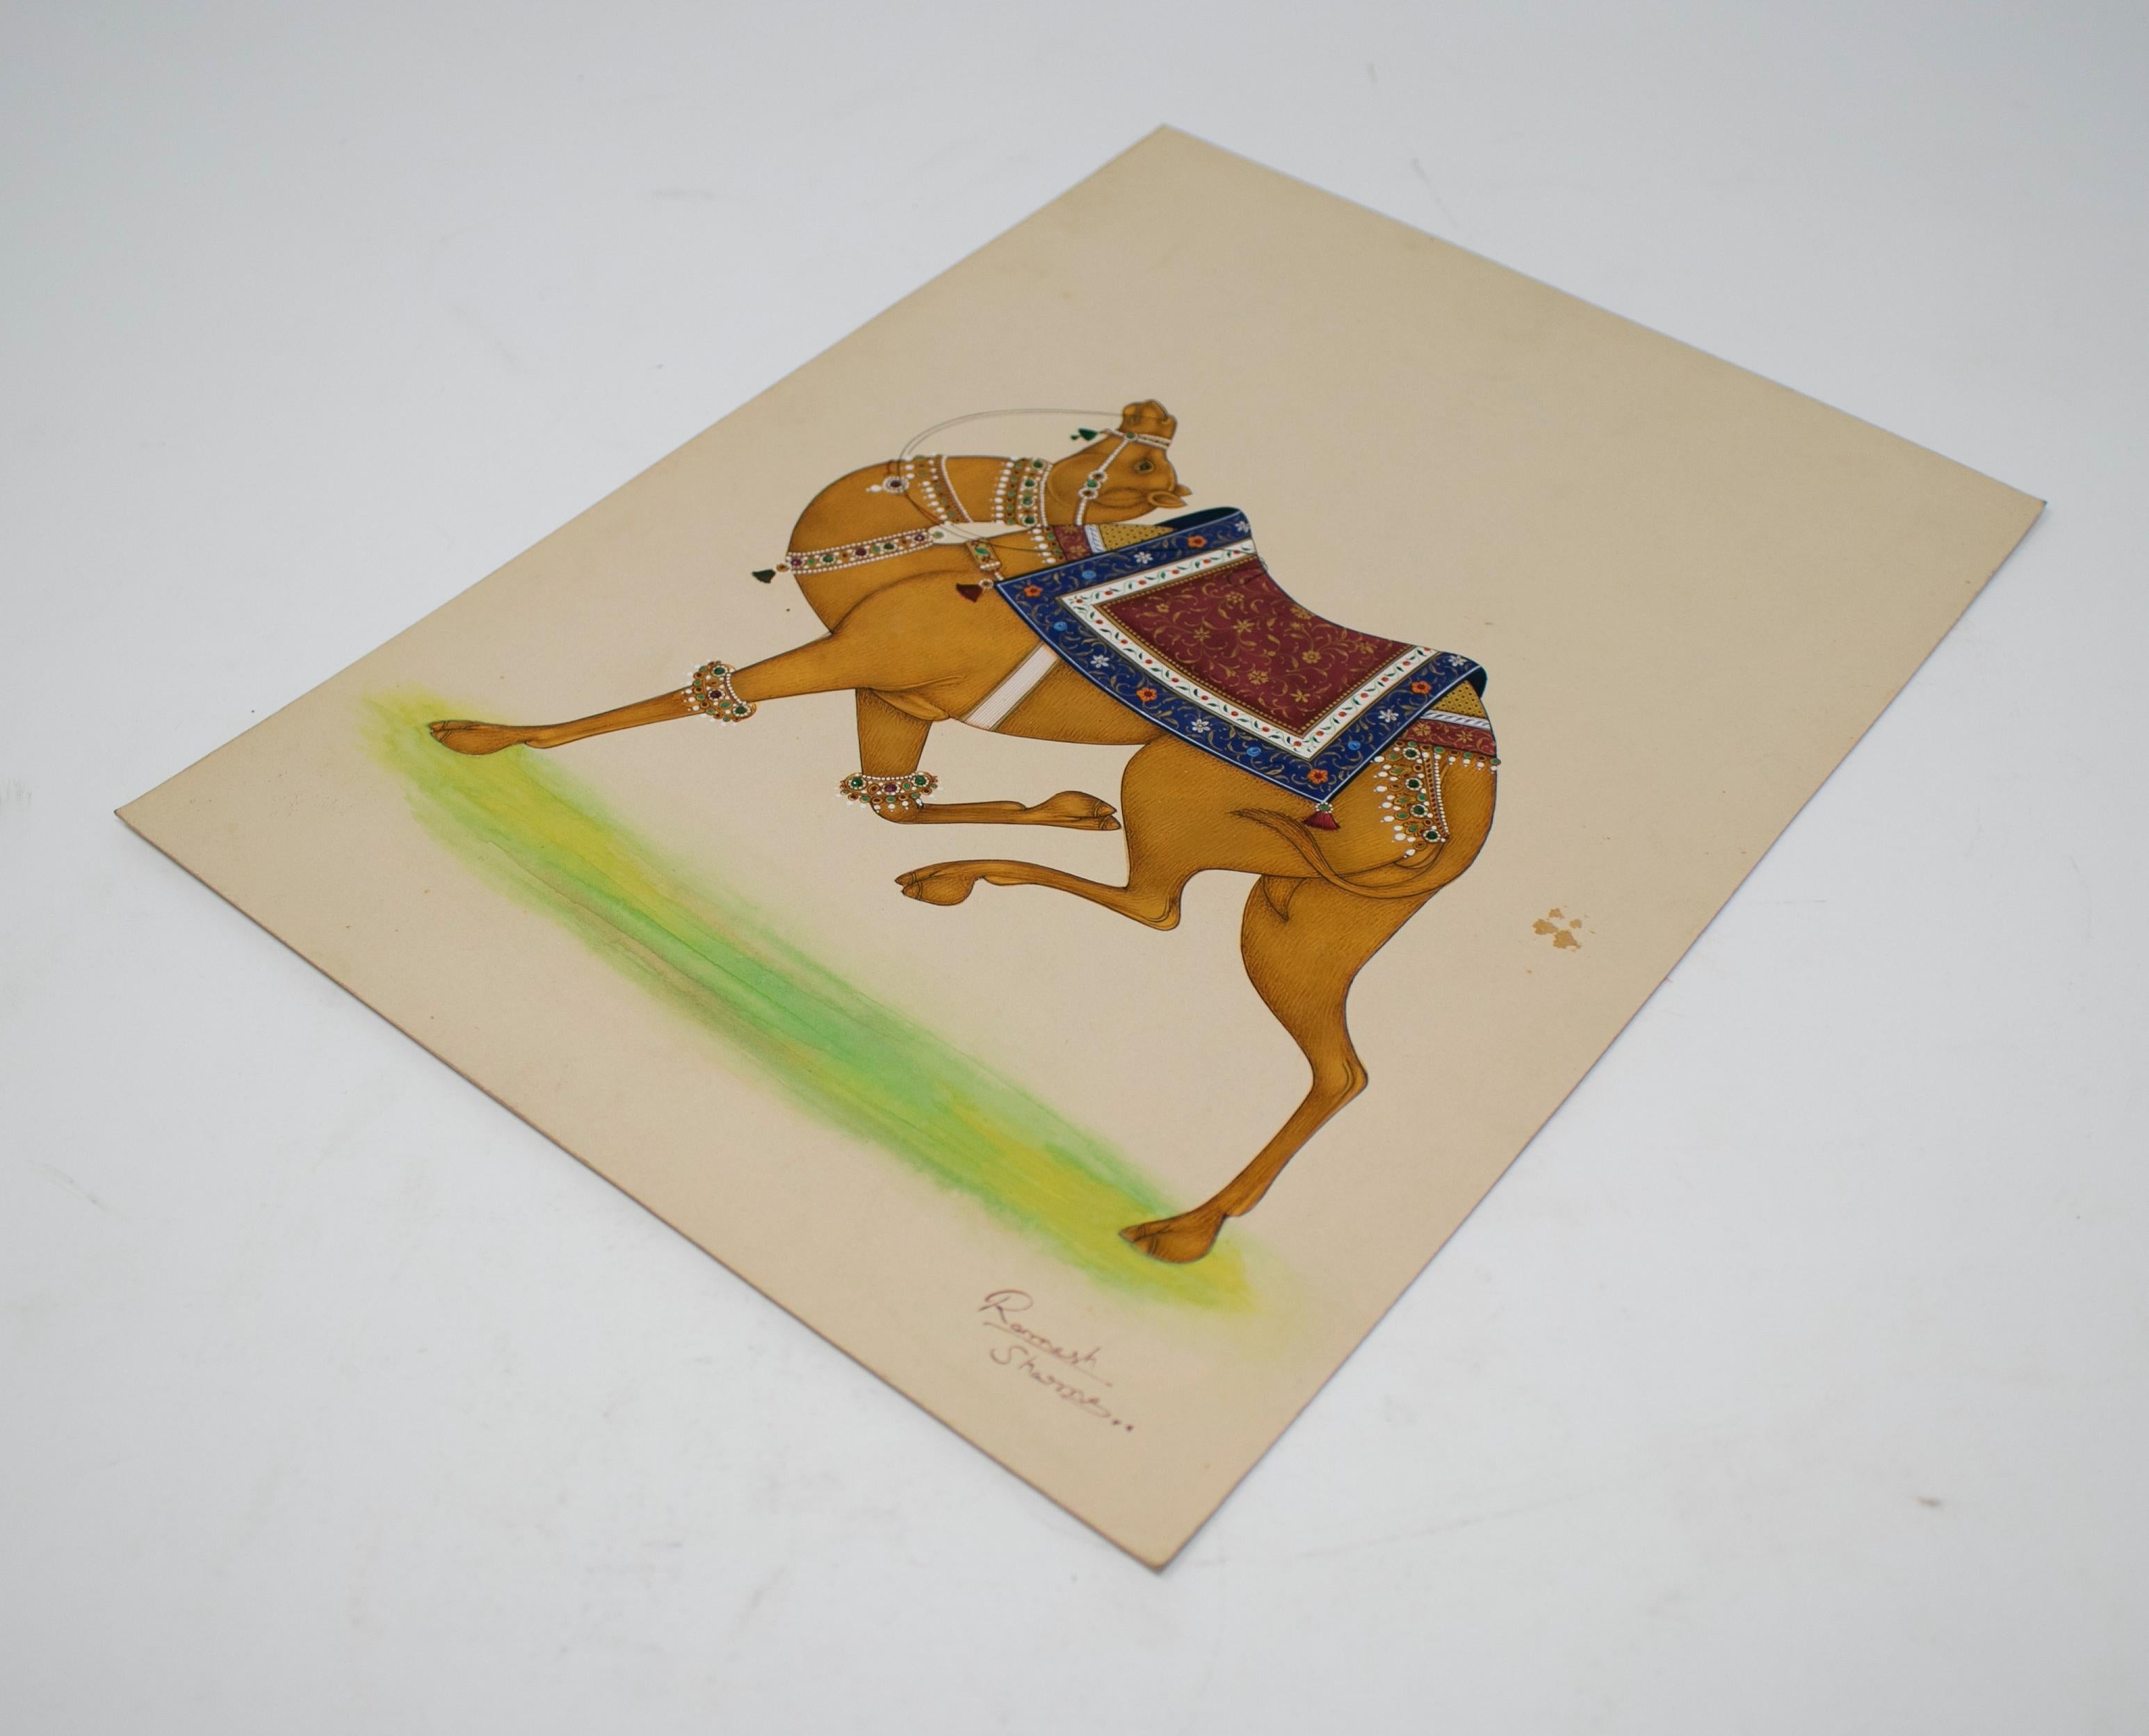 Ramesh Shames, Indian Pair of Elephant and Camel Paper Drawings, 1970s For Sale 3